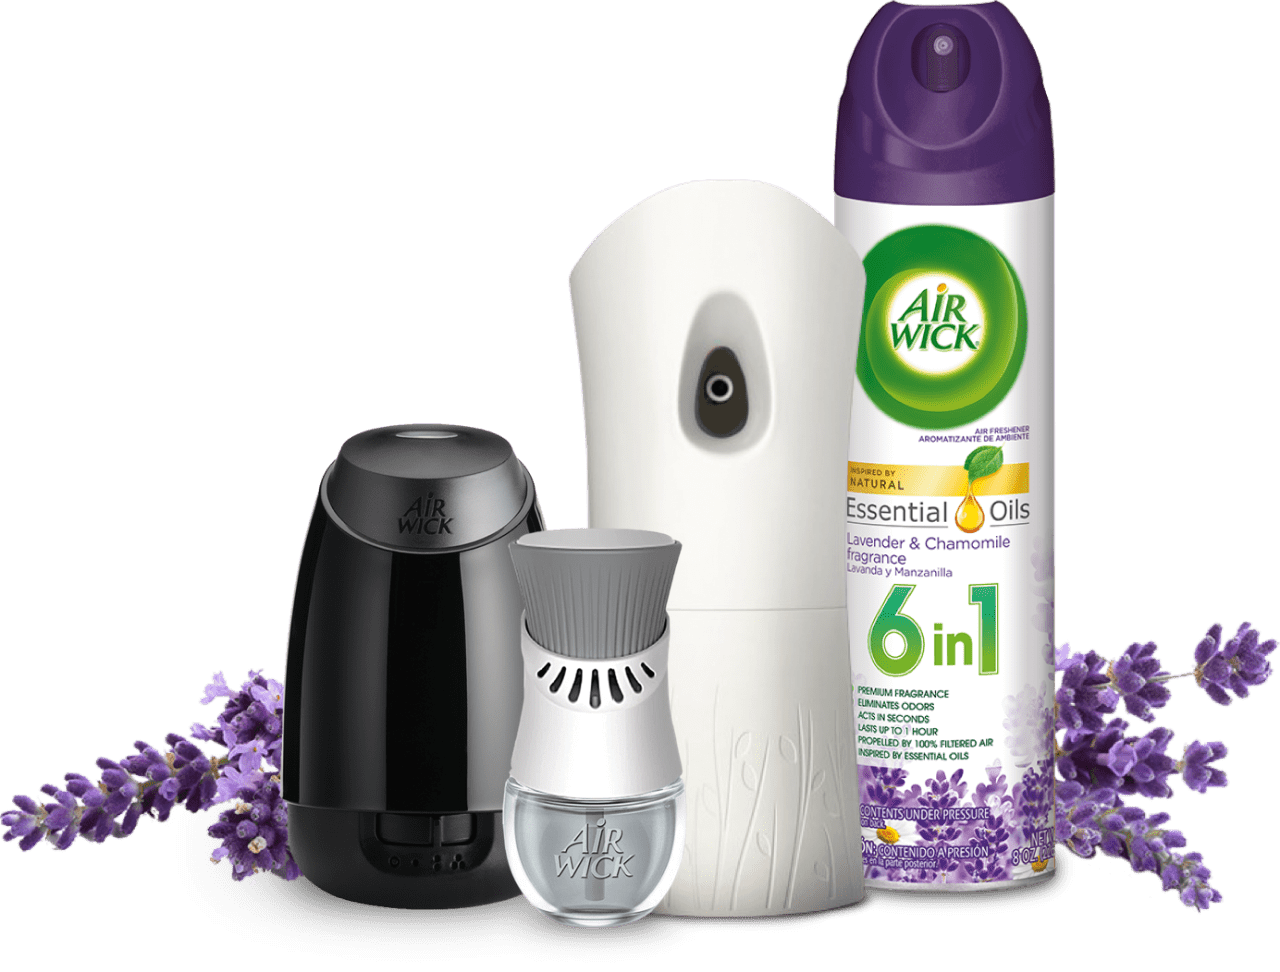 Air Wick Active Raspberry and Lime - Air Freshener Diffuser